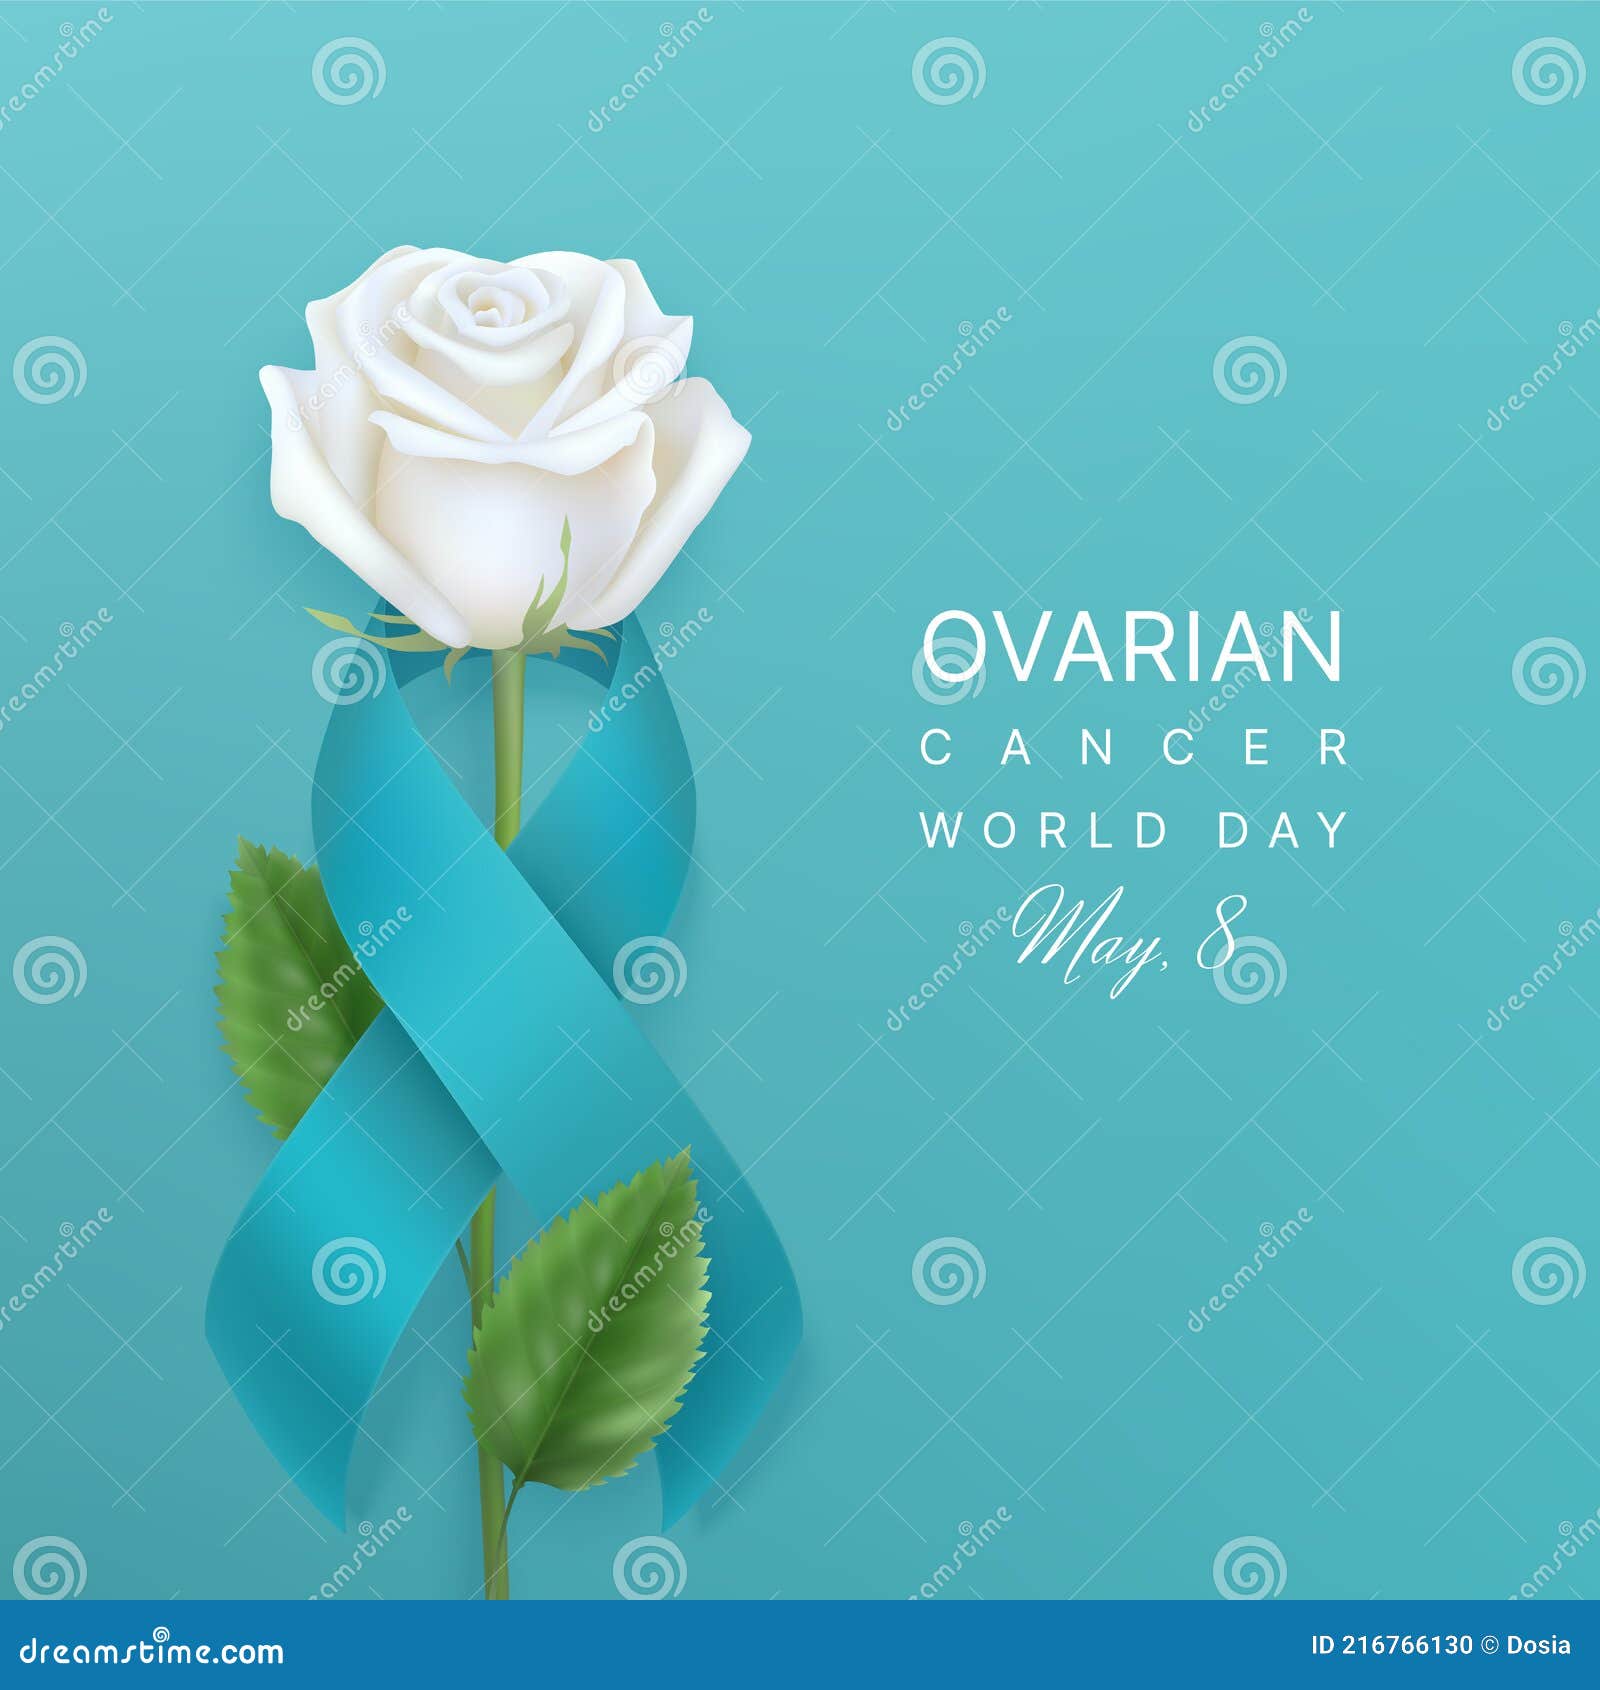 ovarian cancer world day background with ribbon and rose